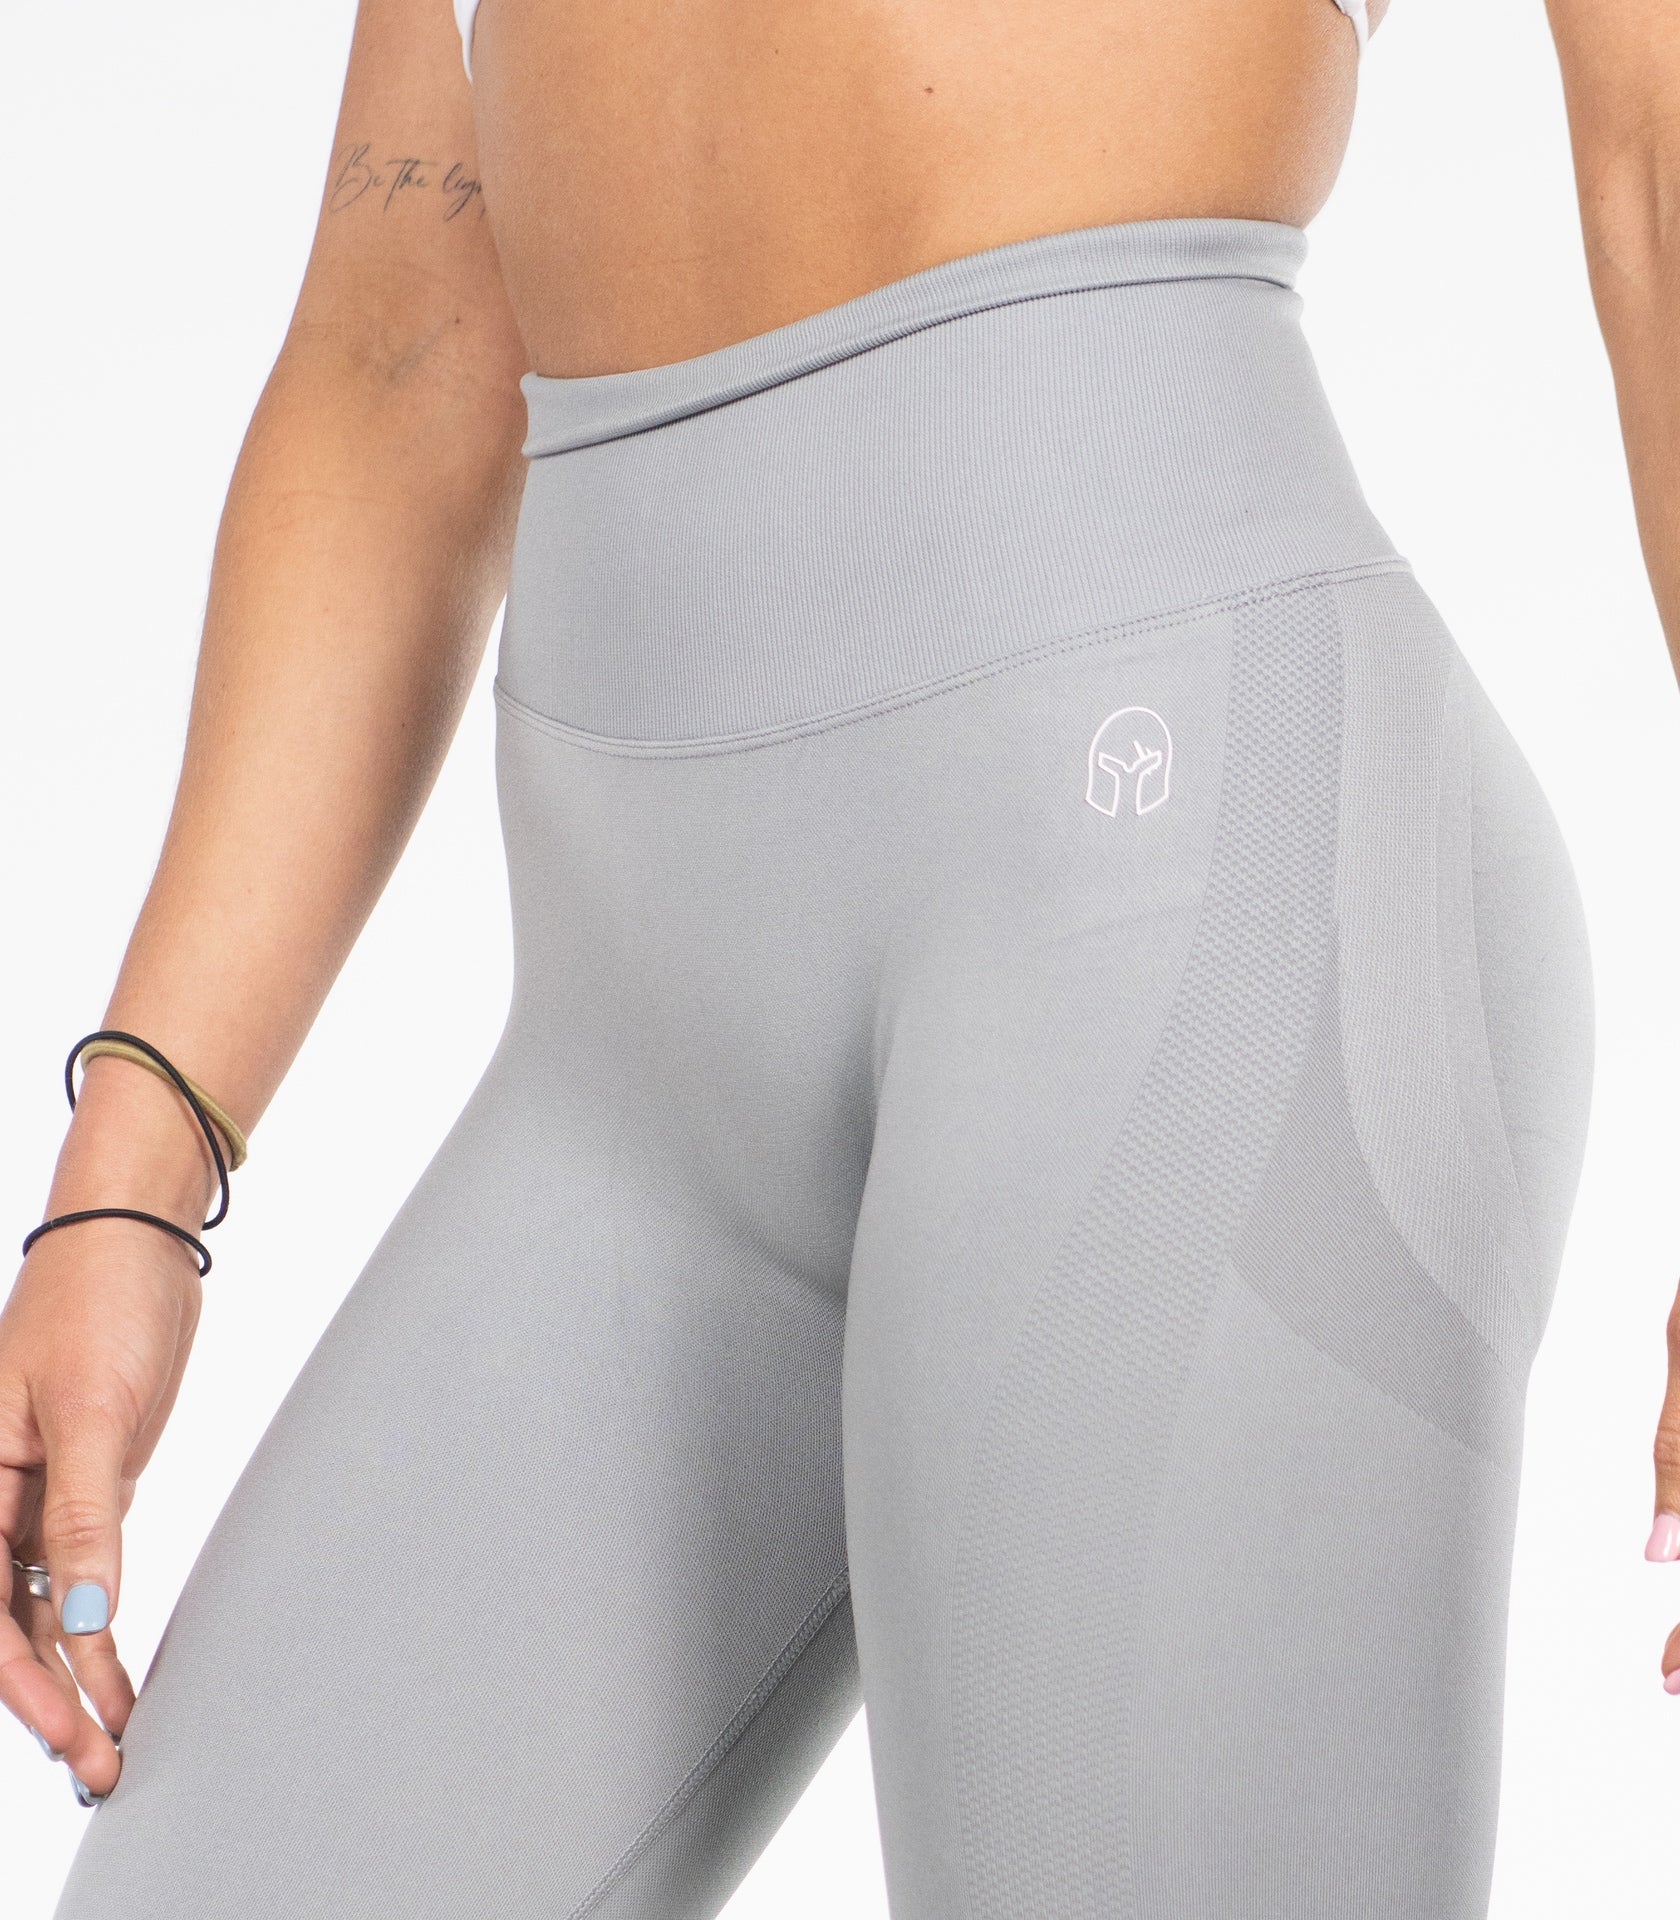 Gymshark Women's Activewear for sale in West Columbia, South